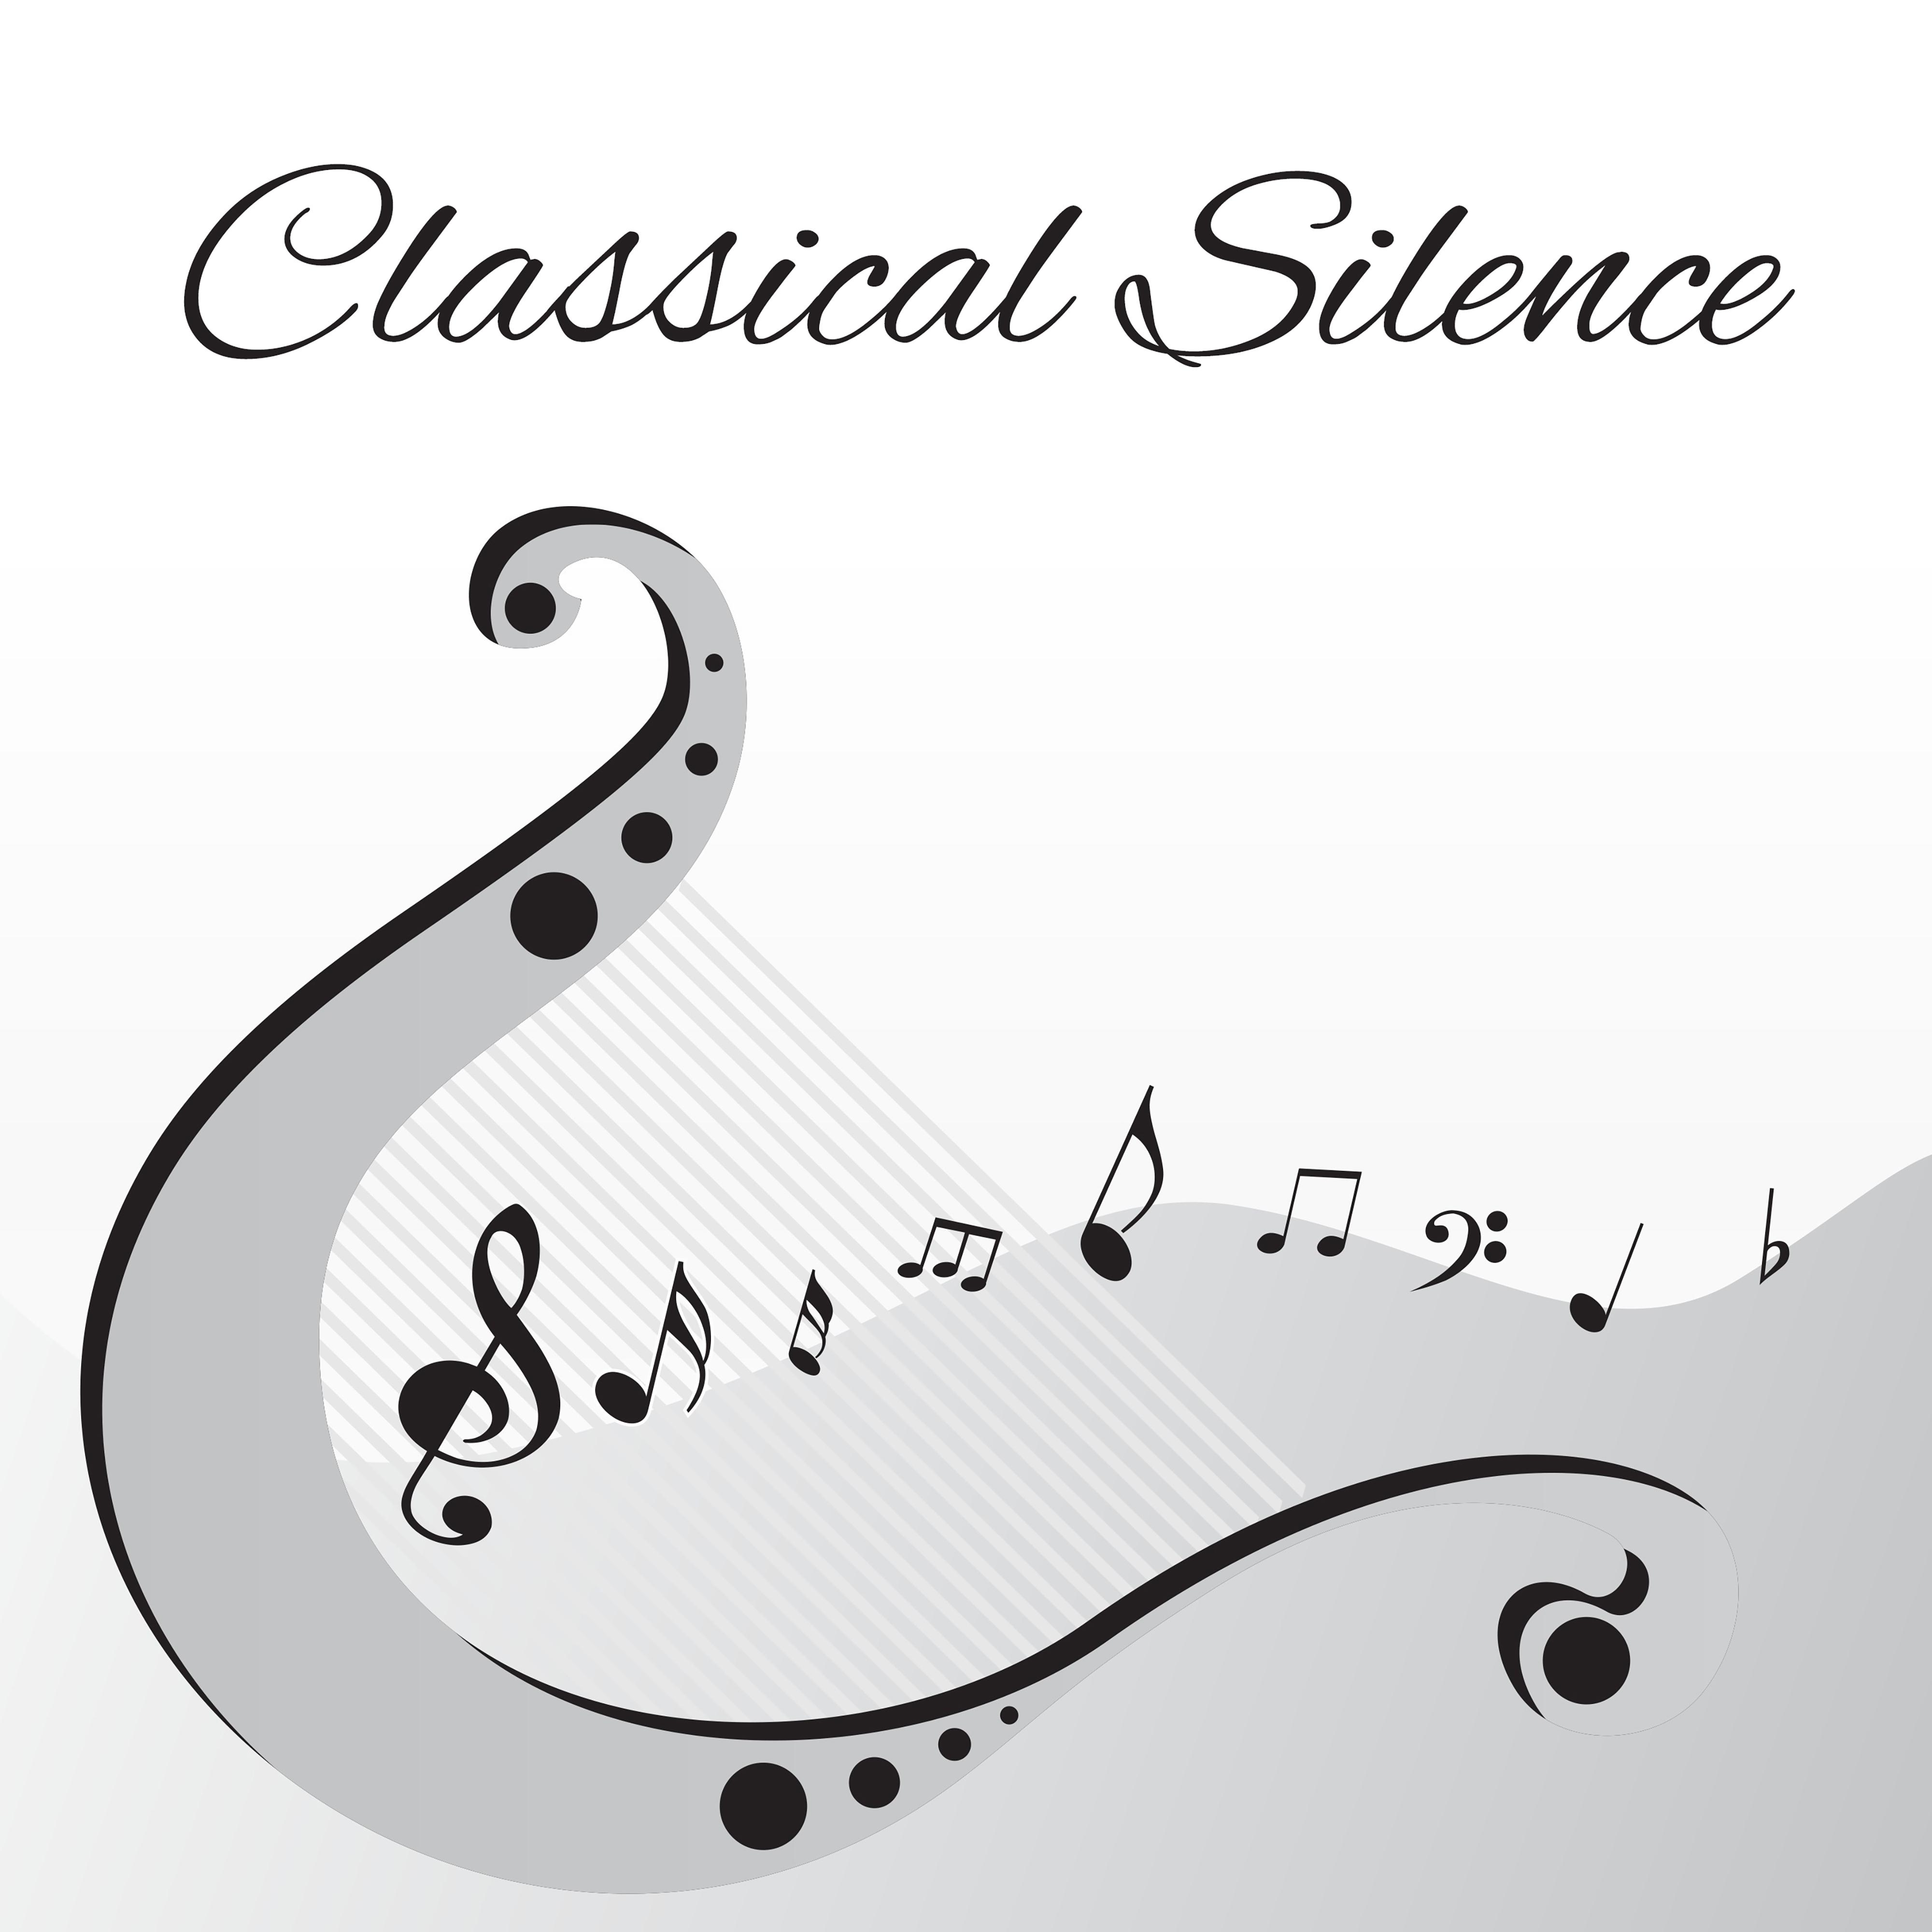 Classical Silence – Music for Relaxation, Rest in Home, Music Helps You Relax, Chillout with Mendelssohn, Satie